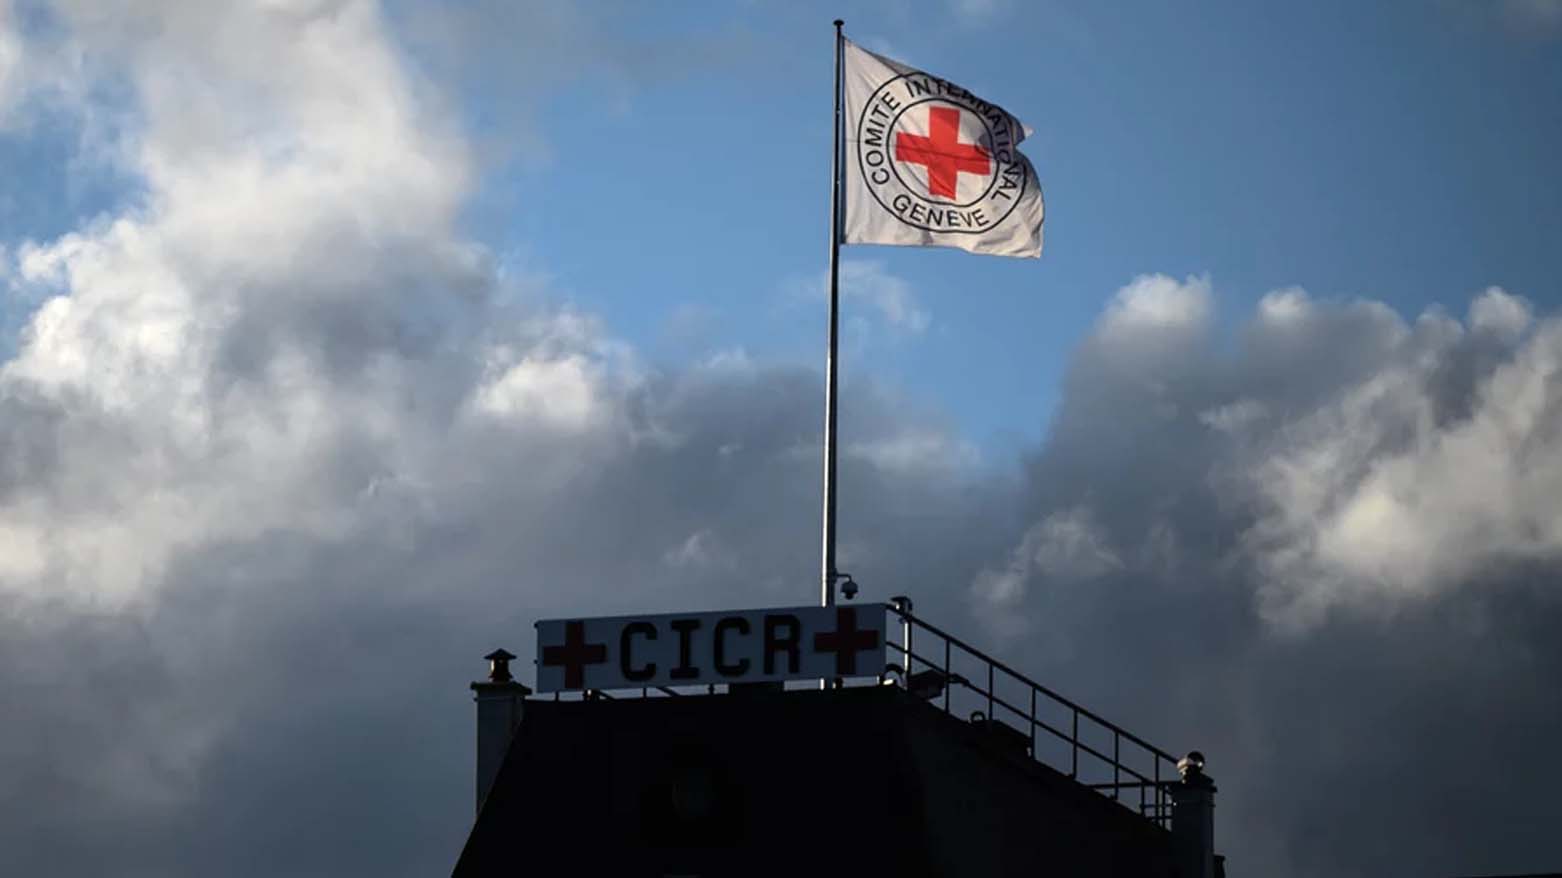 A flag of the International Committee of the Red Cross flutters above the humanitarian organization's headquarters in Geneva, Sept. 29, 2021. (Photo: Fabrice Coffrini/AFP)